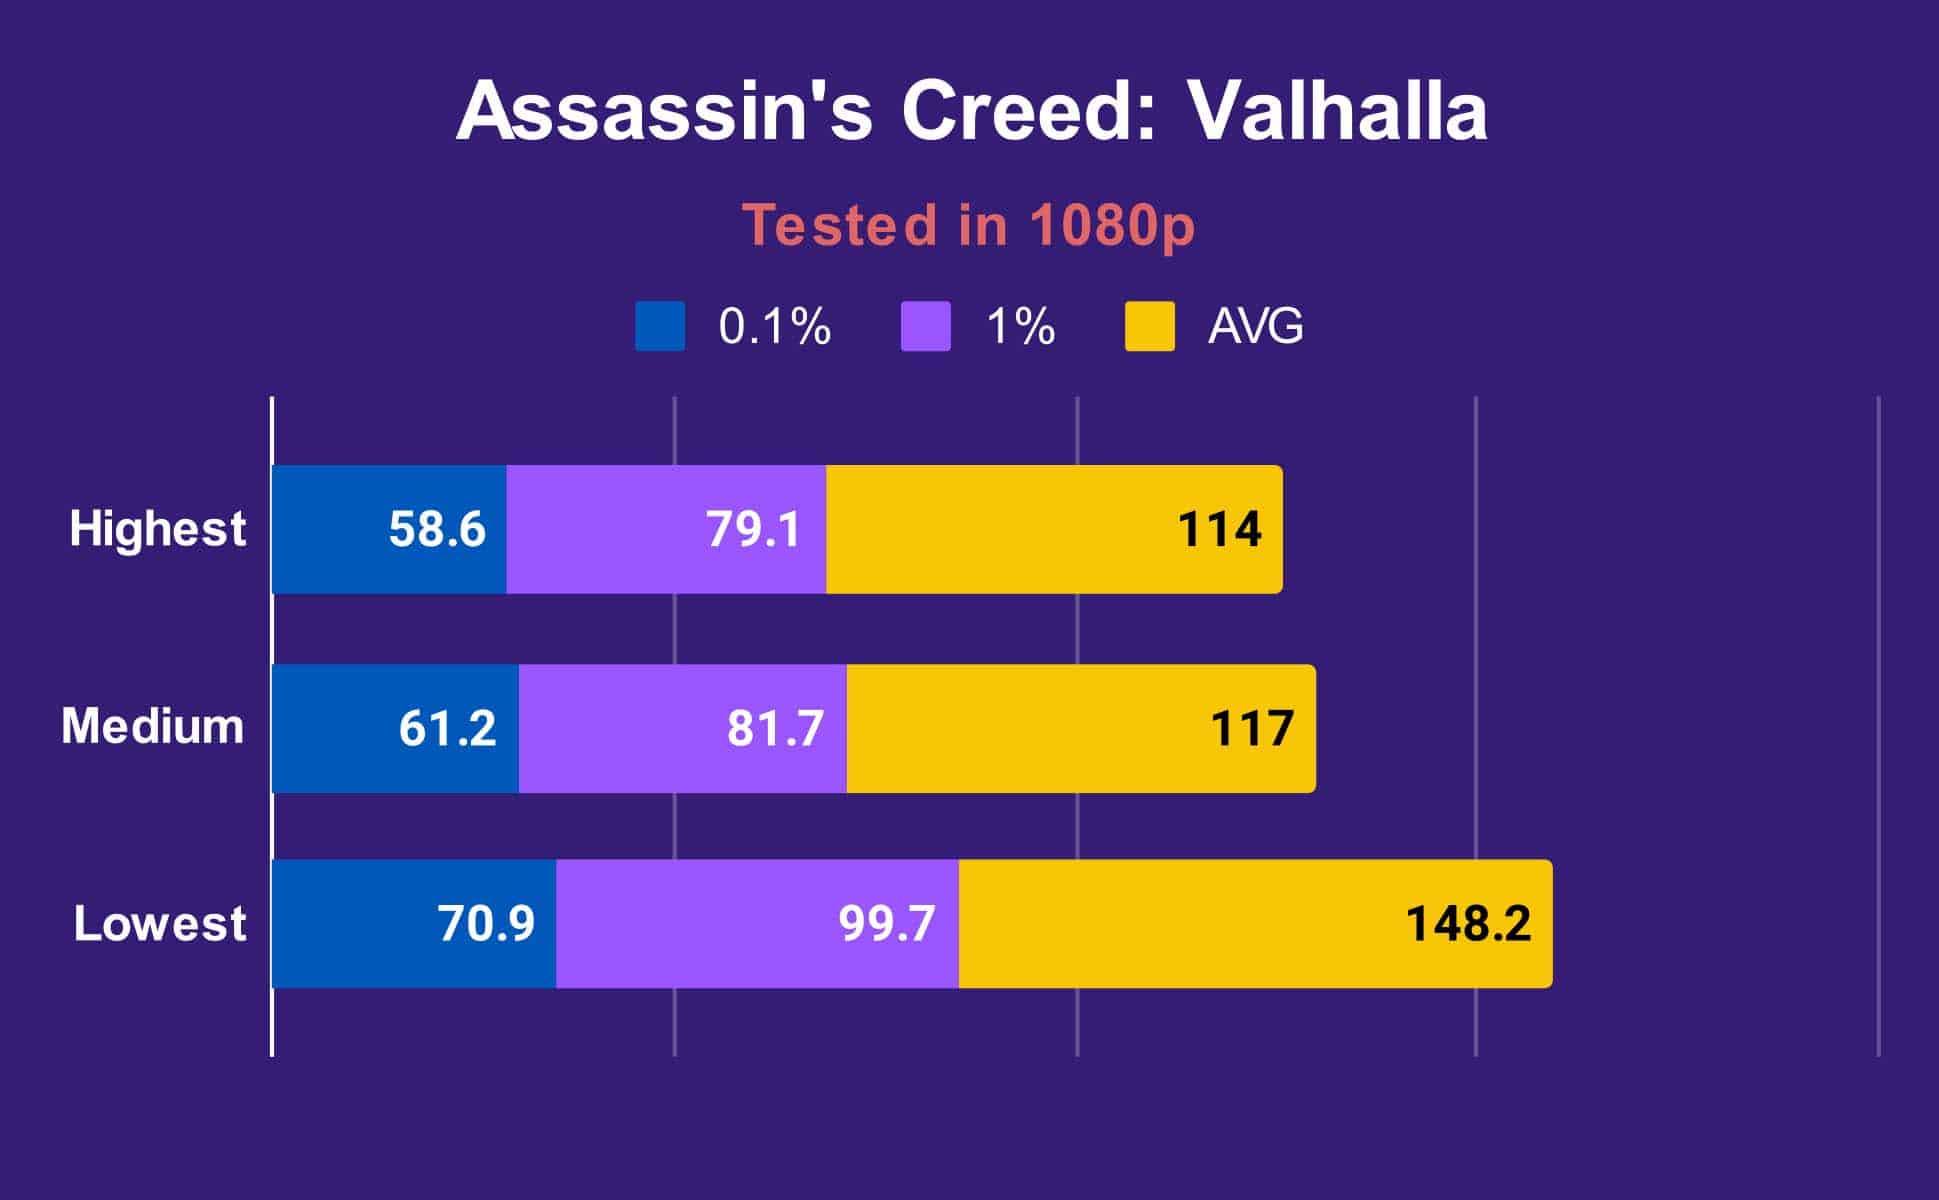 ASUS ROG FLOW X16 BENCHMARK ASSASSINS CREED VALHALLA TESTED IN 1080P